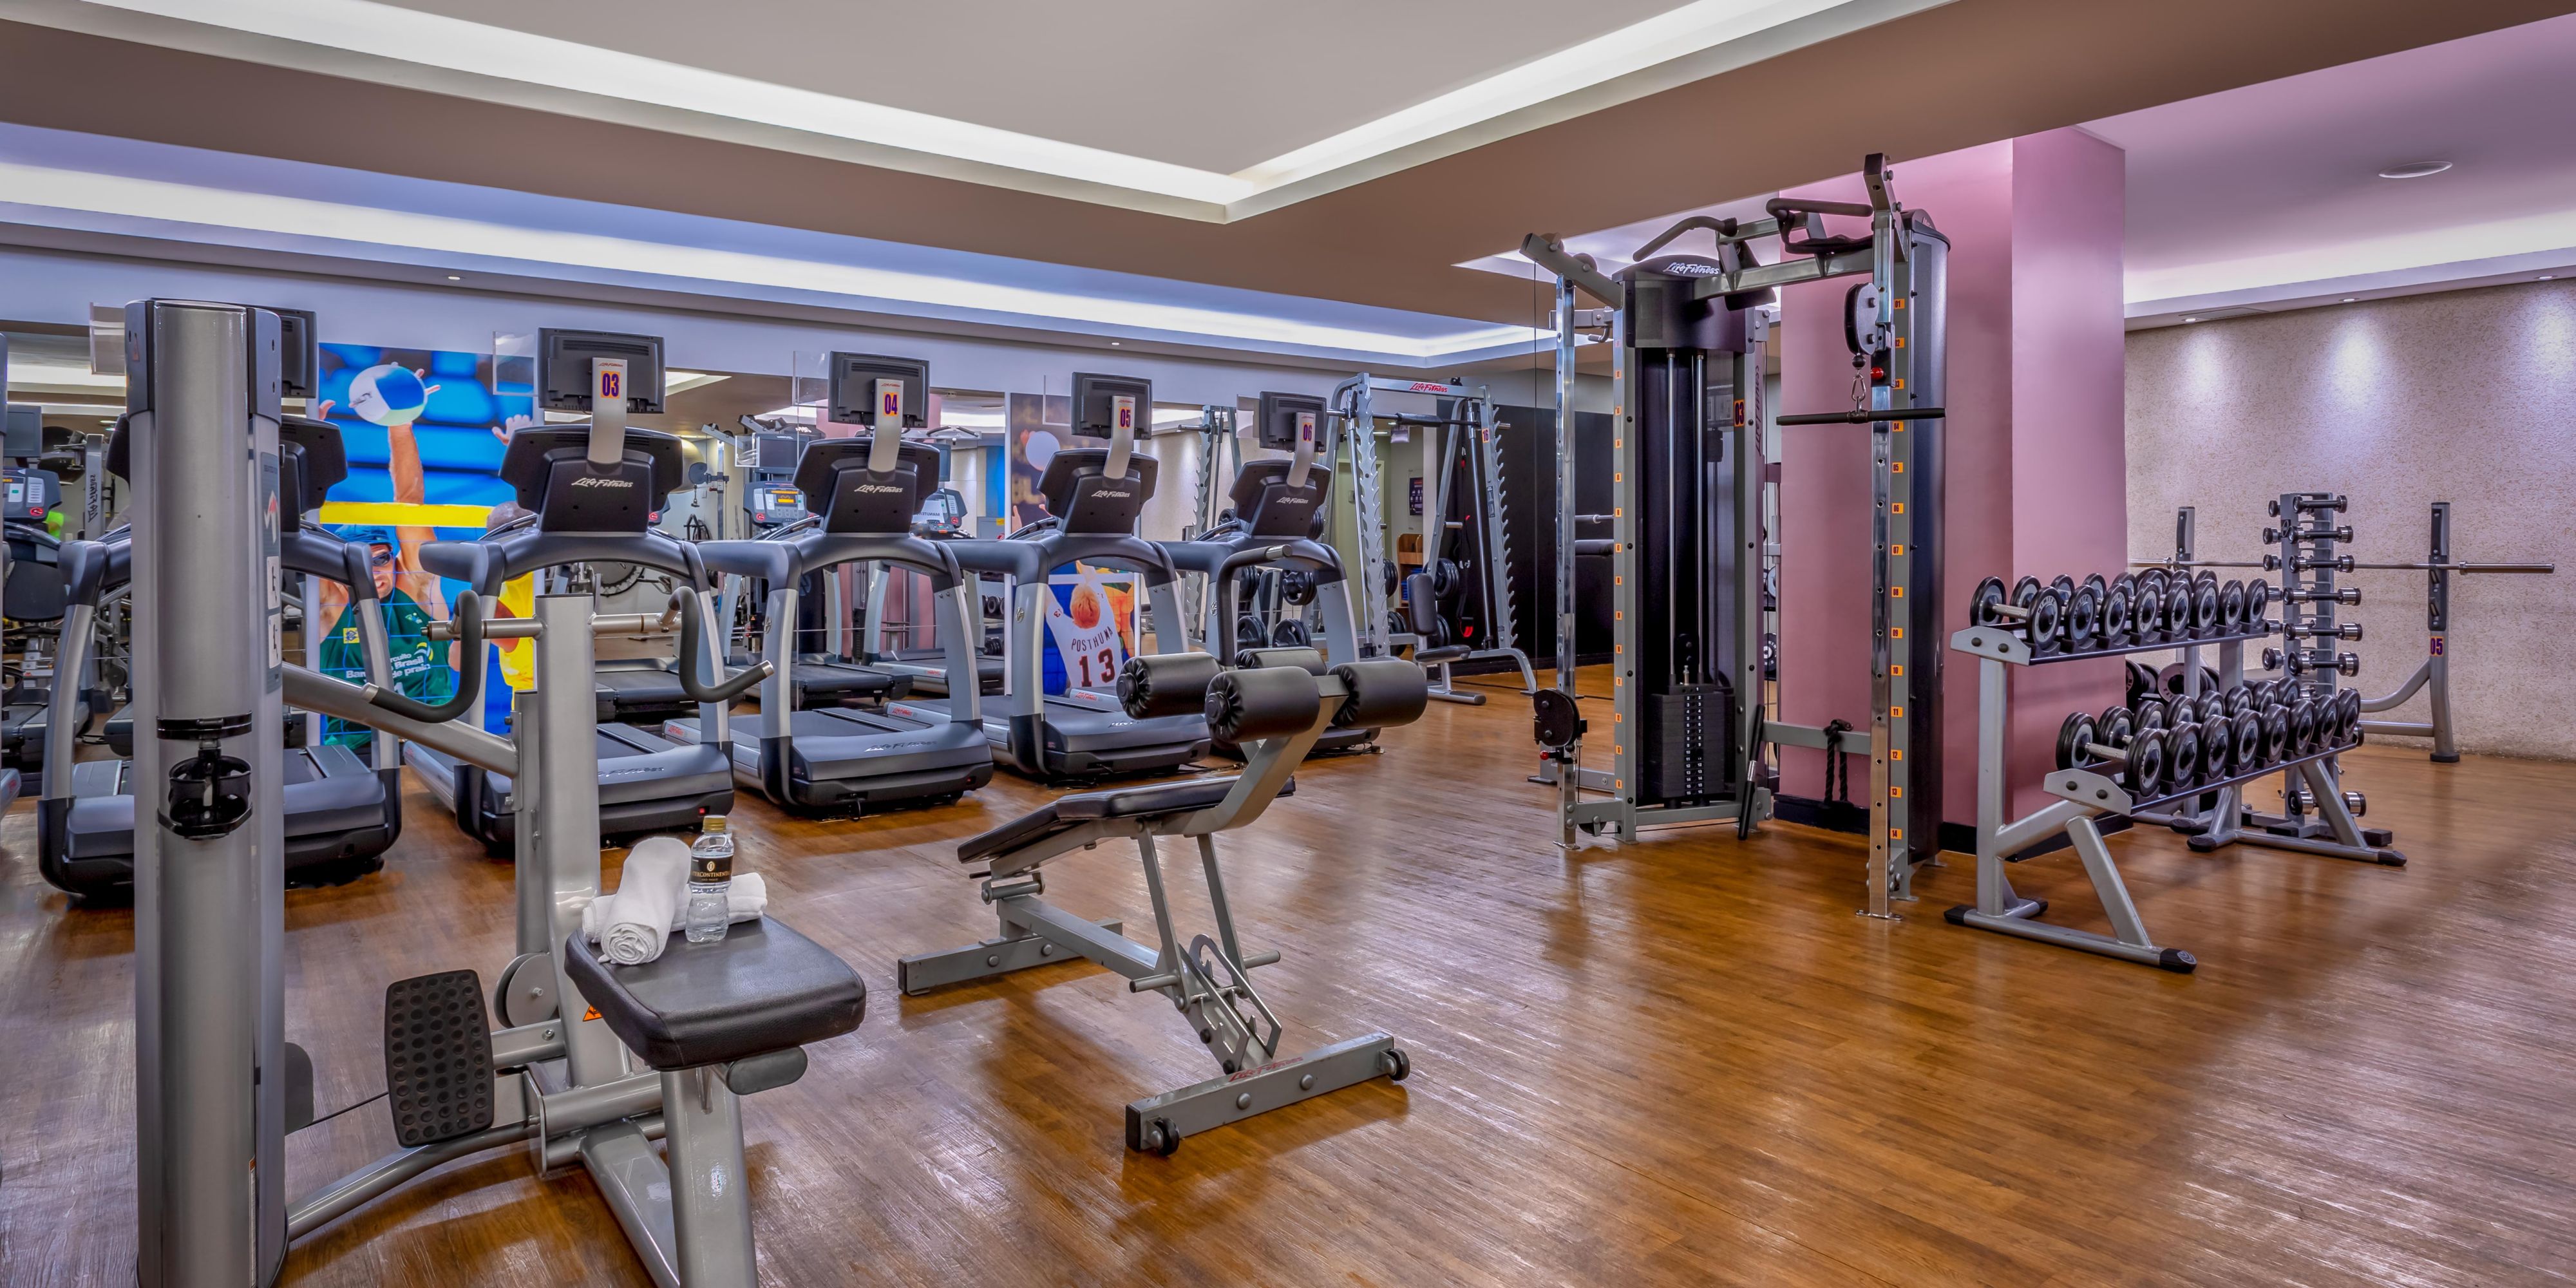 Keep fit with our complete gym, open 24/7!